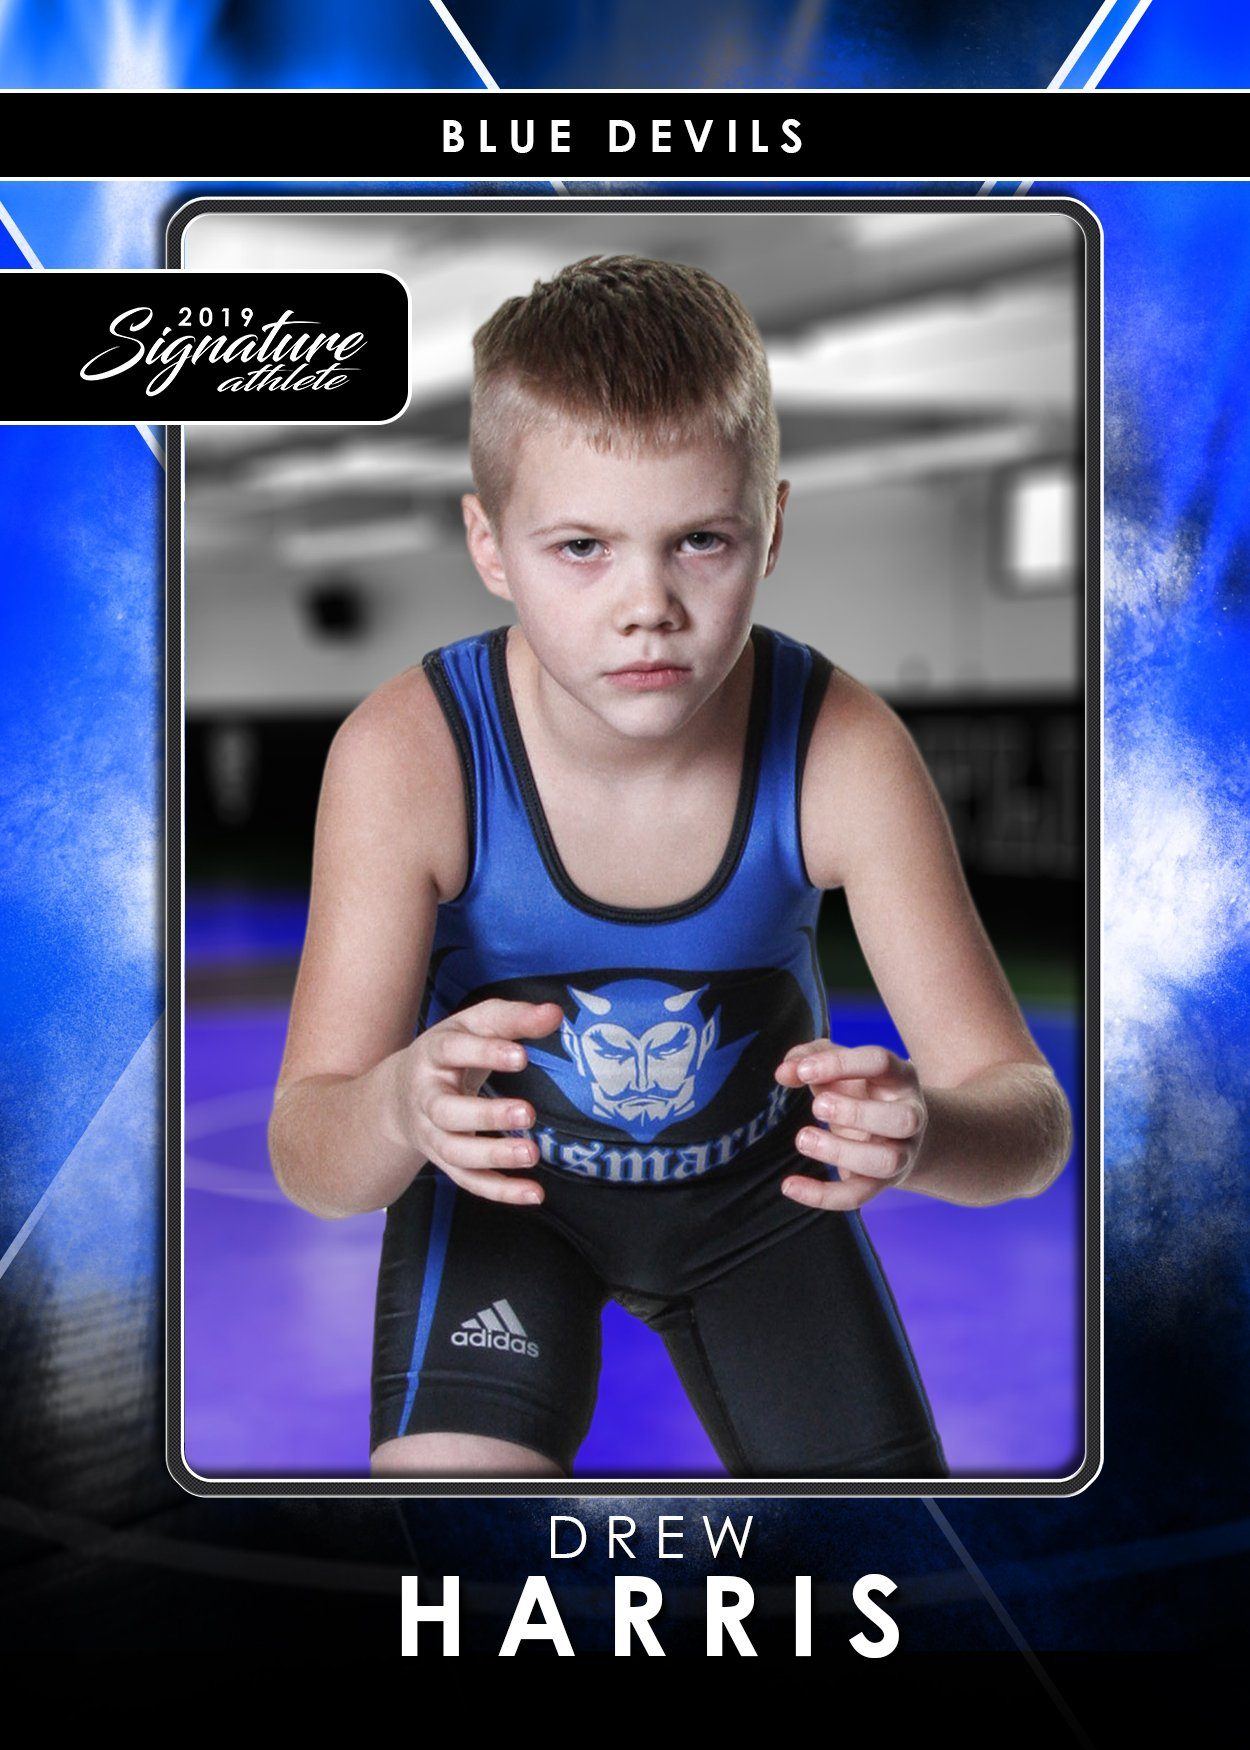 Signature Player - Wrestling - V2 - T&I Drop-In Collection-Photoshop Template - Photo Solutions